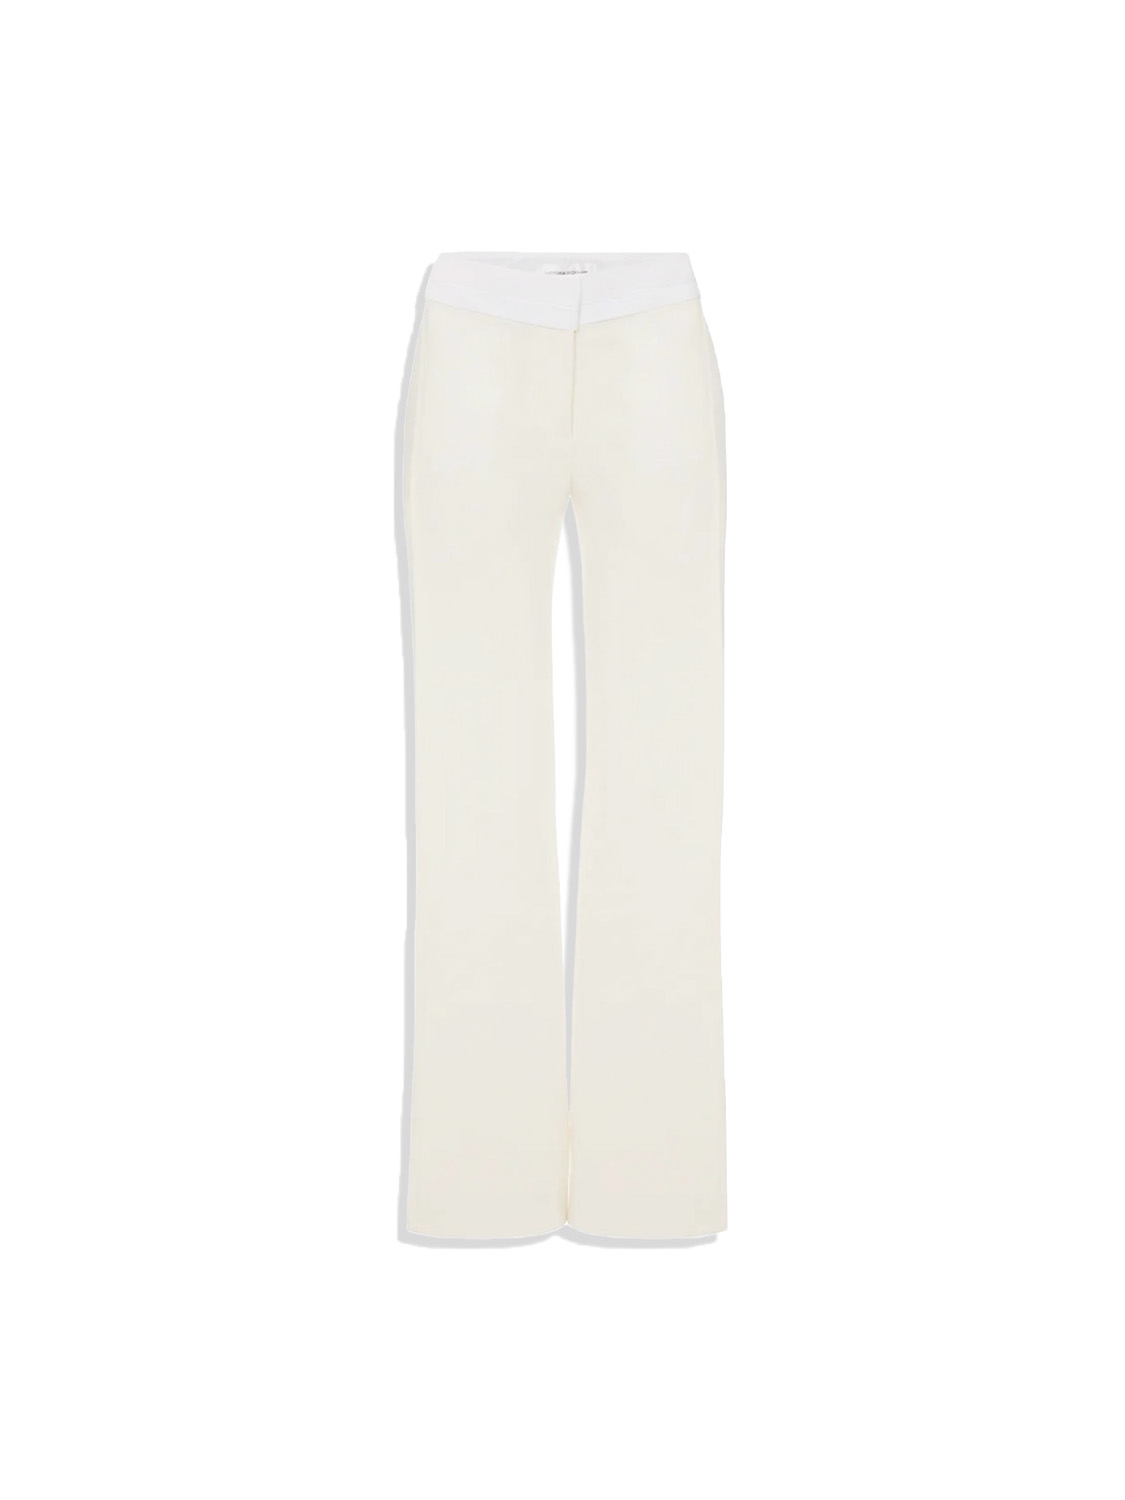 Textured Wool Side Panel Trousers - Wide Leg Trousers with Decorative Stitching